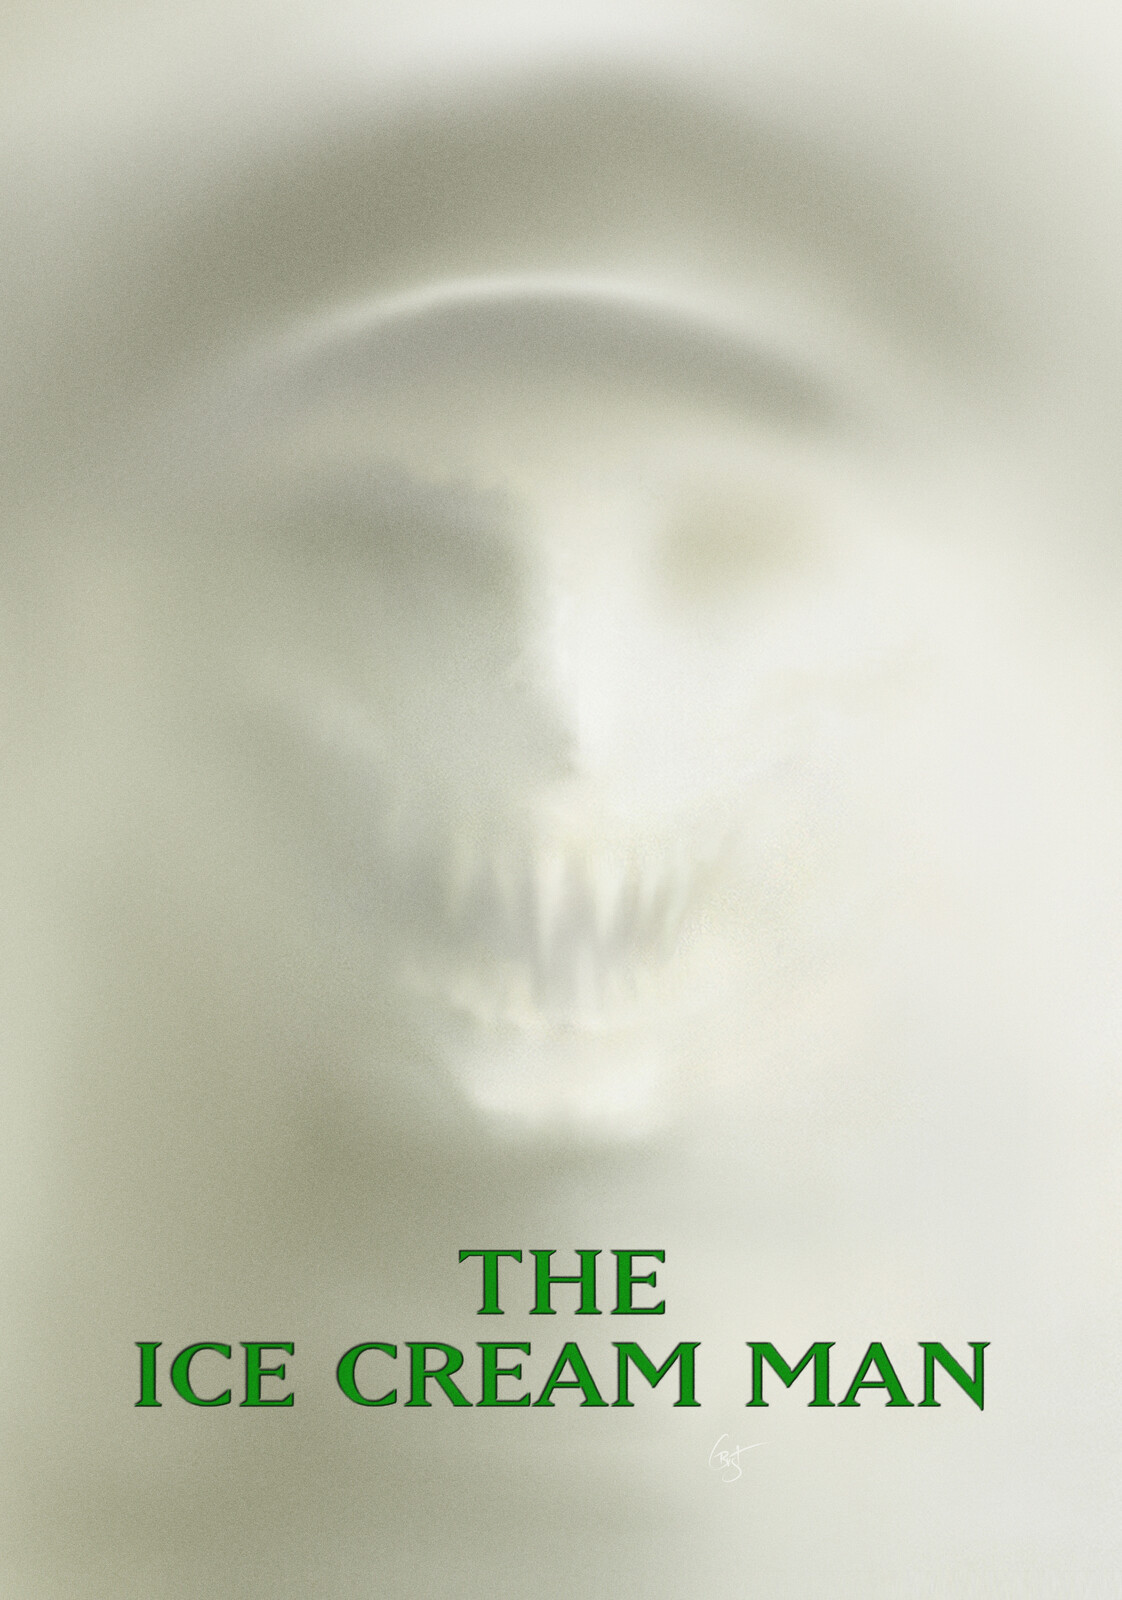 ICE CREAM MAN AND FRIGHTENERS CROSSOVER
Inspired by the movie "The Ice Cream Man" and "The Frighteners" 

